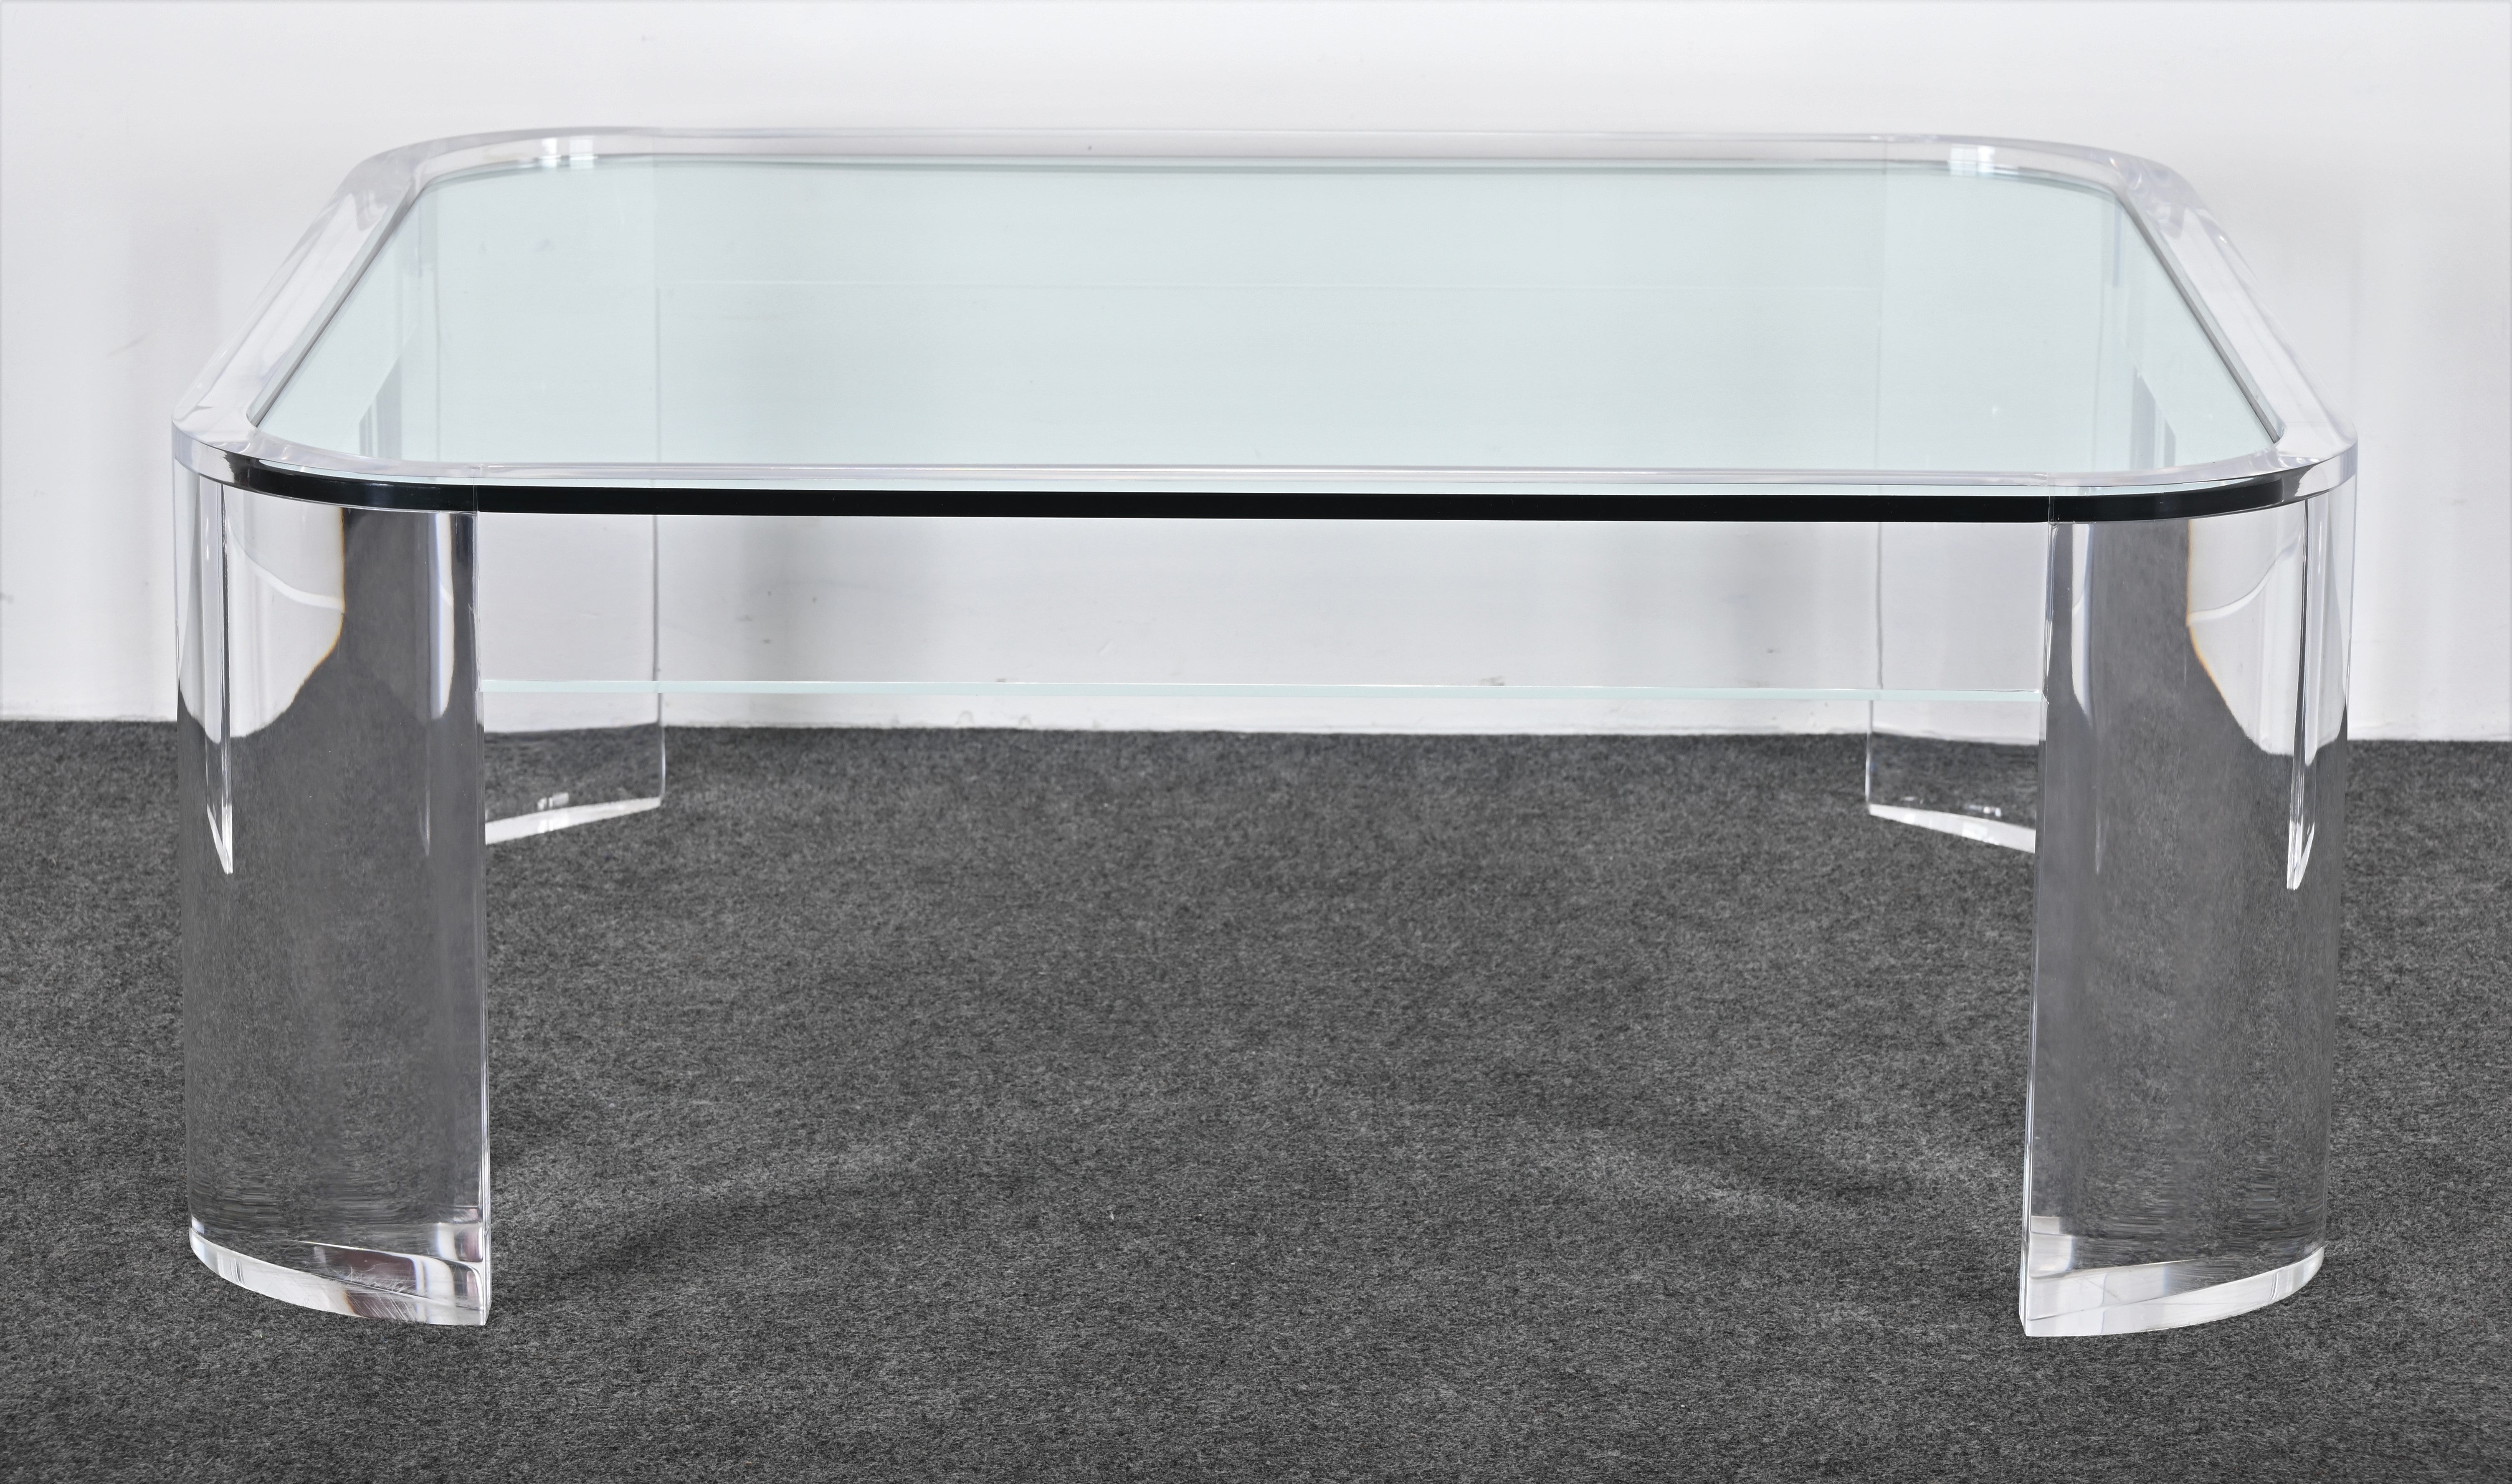 A large beautiful solid lucite table with radius corners and inset glass top by Les Prismatiques, USA, 1970s. This table would work well in a New York apartment or surrounded by decorative furnishings. It is a classic design that has been used for